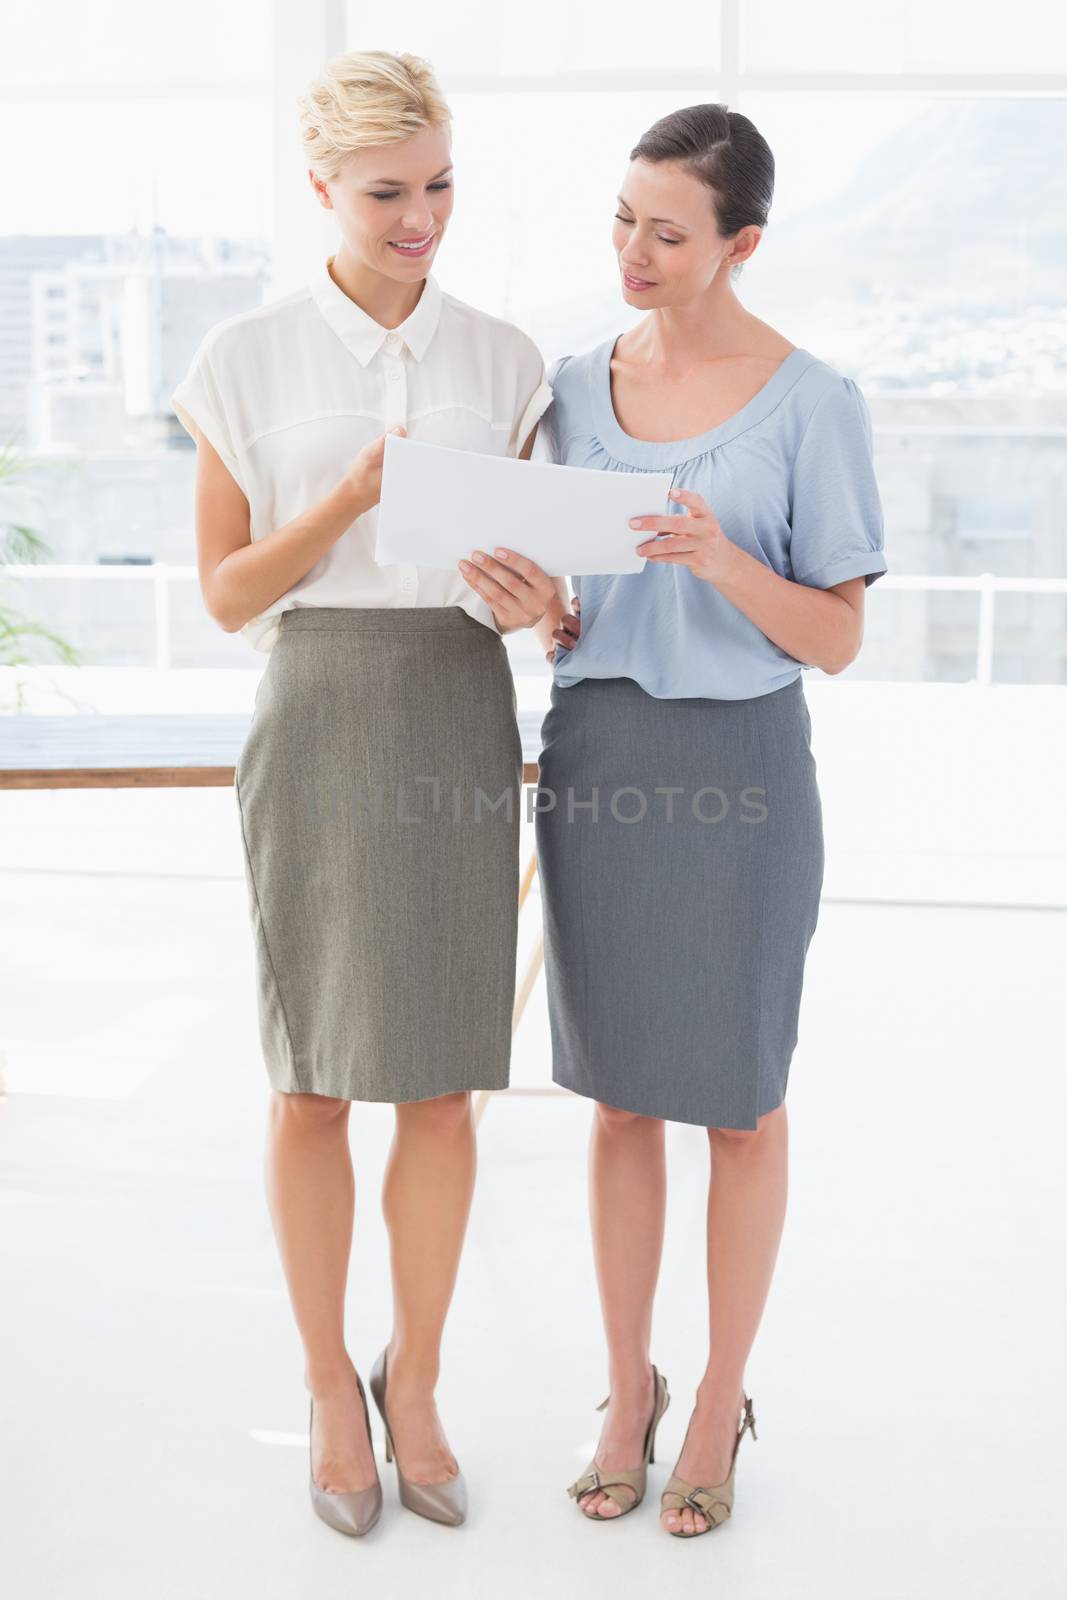 Businesswomen working together in an office